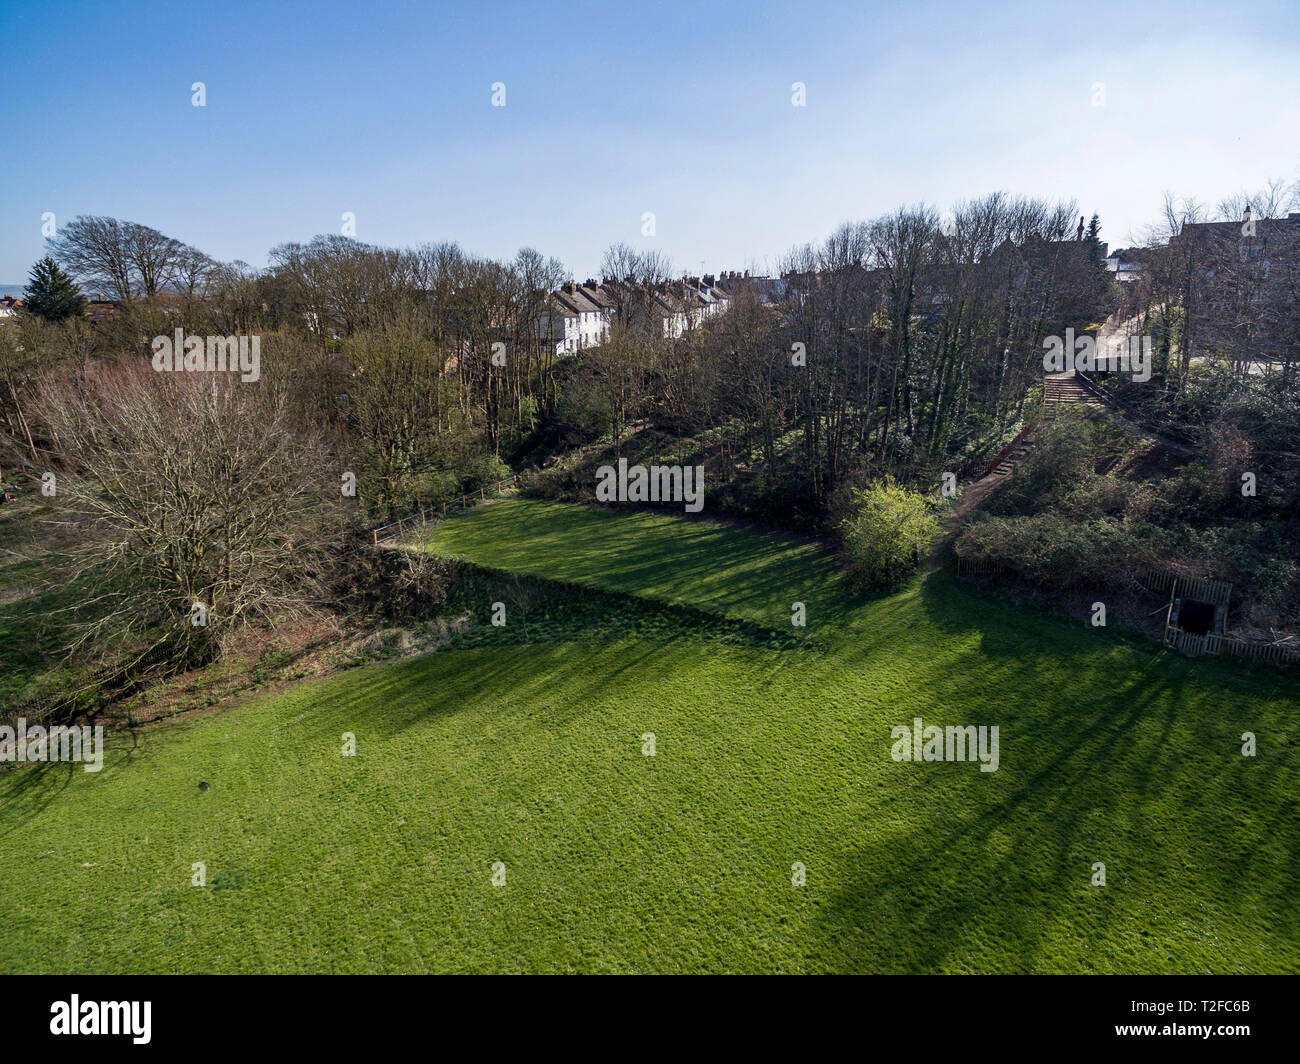 Aerial views of Lewes, East Sussex, UK, showing Baxters Field Stock Photo